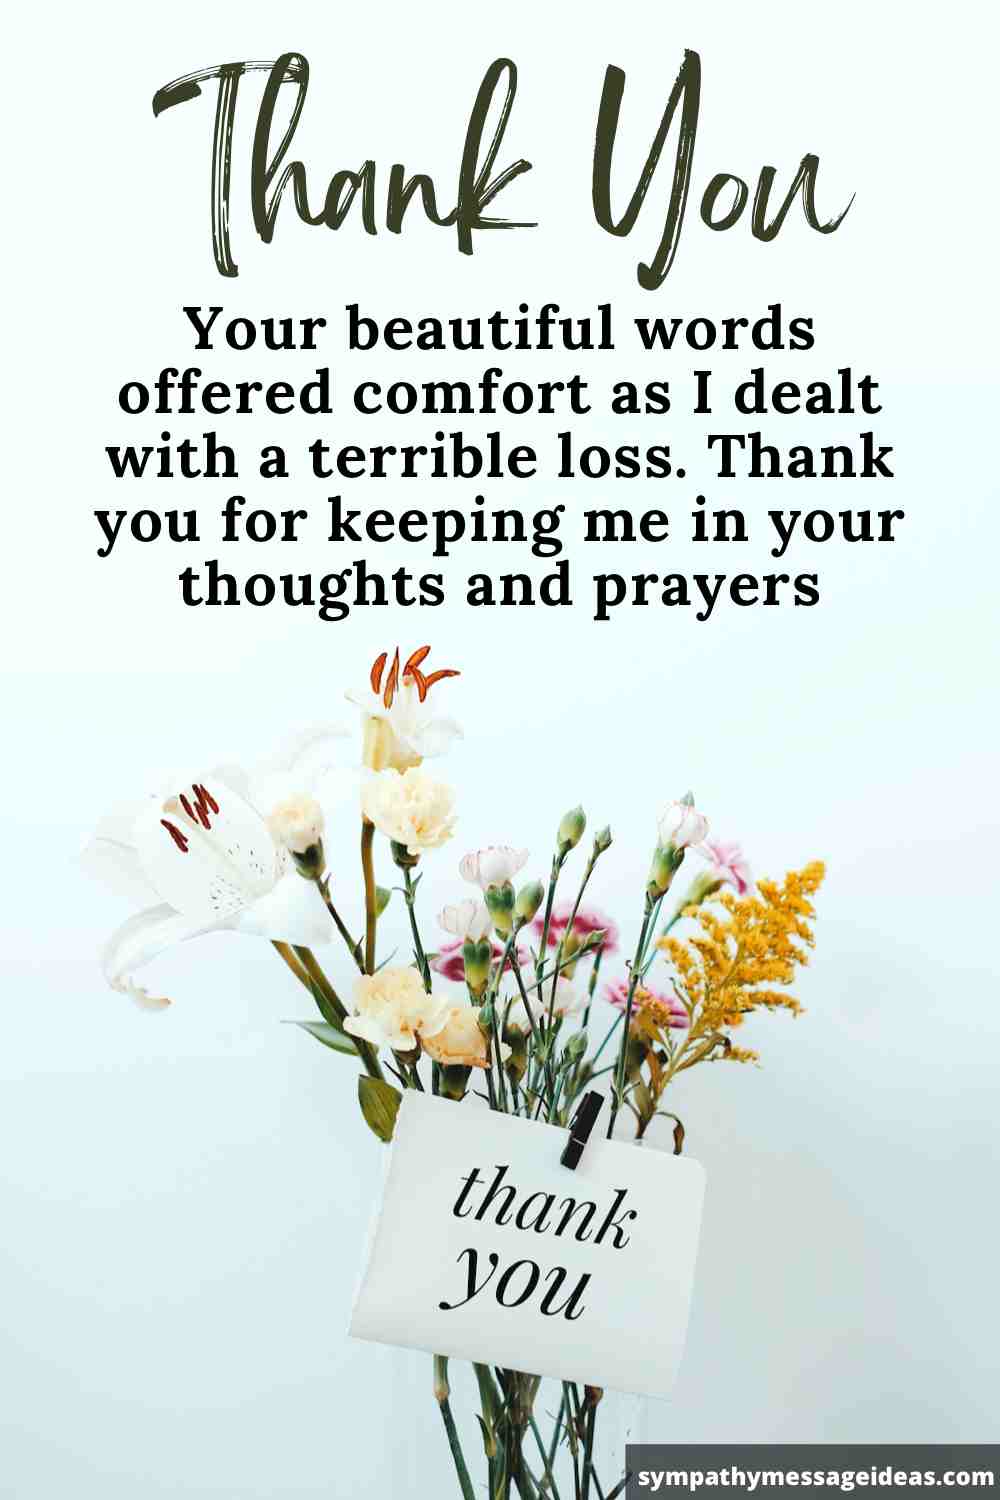 response to sympathy cards